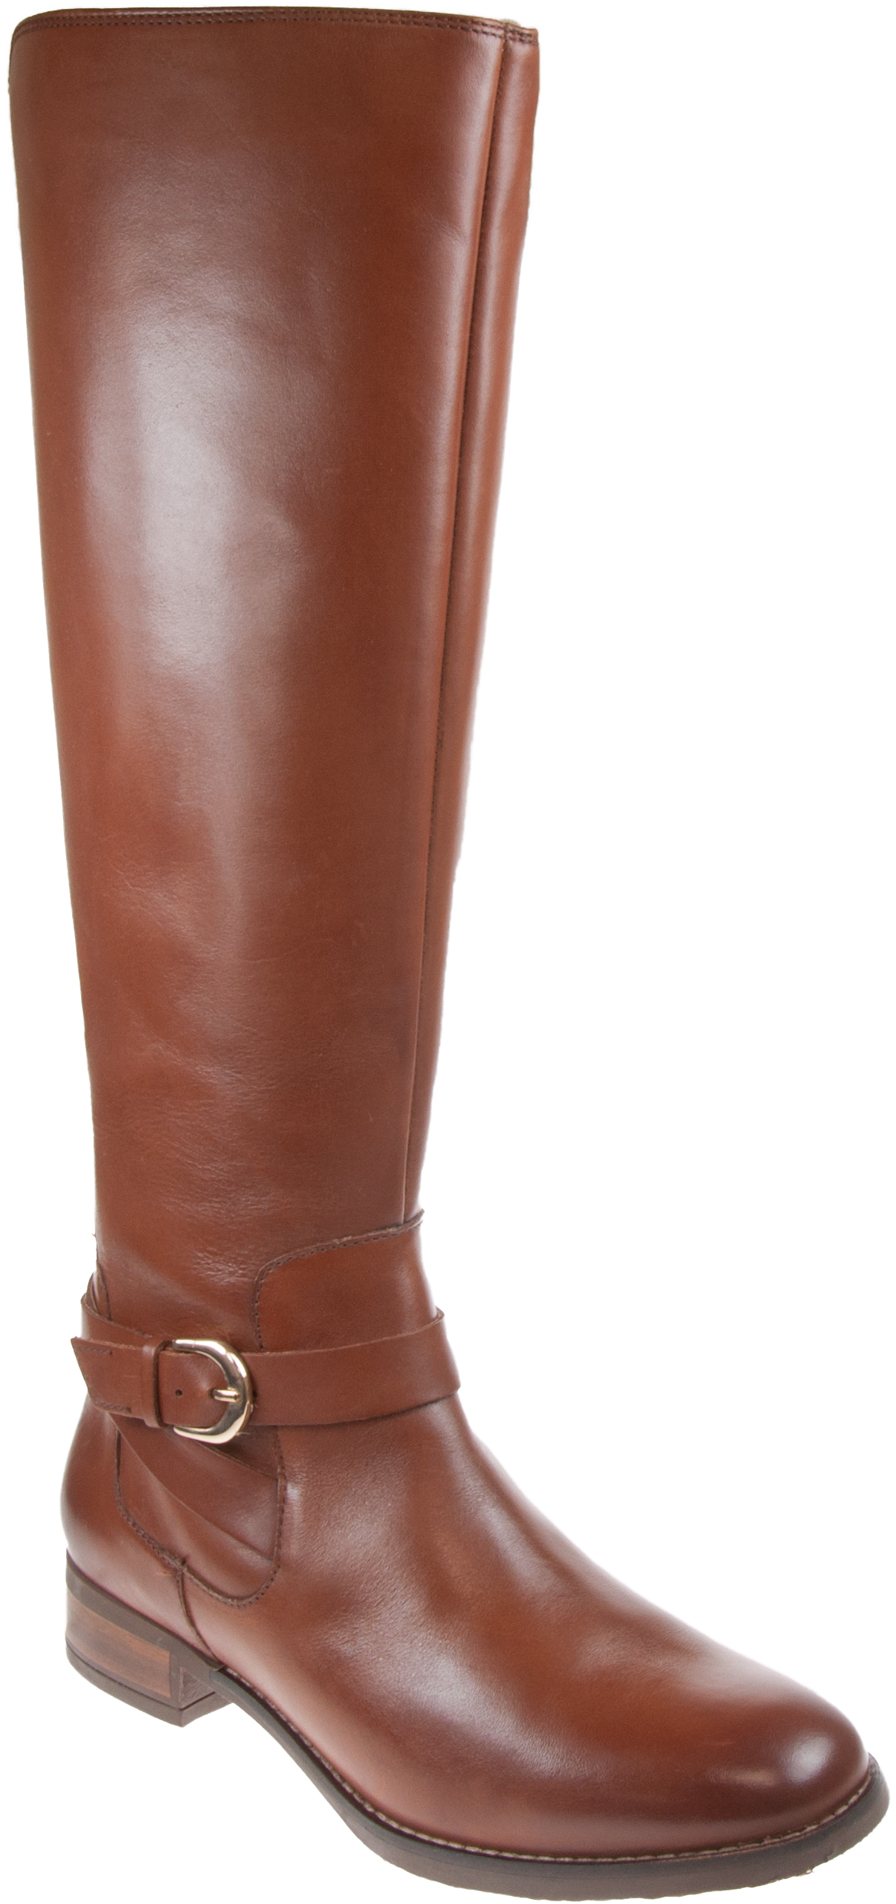 Clarks Netley Whirl Tan Leather 26144987 - Knee High Boots - Humphries ...